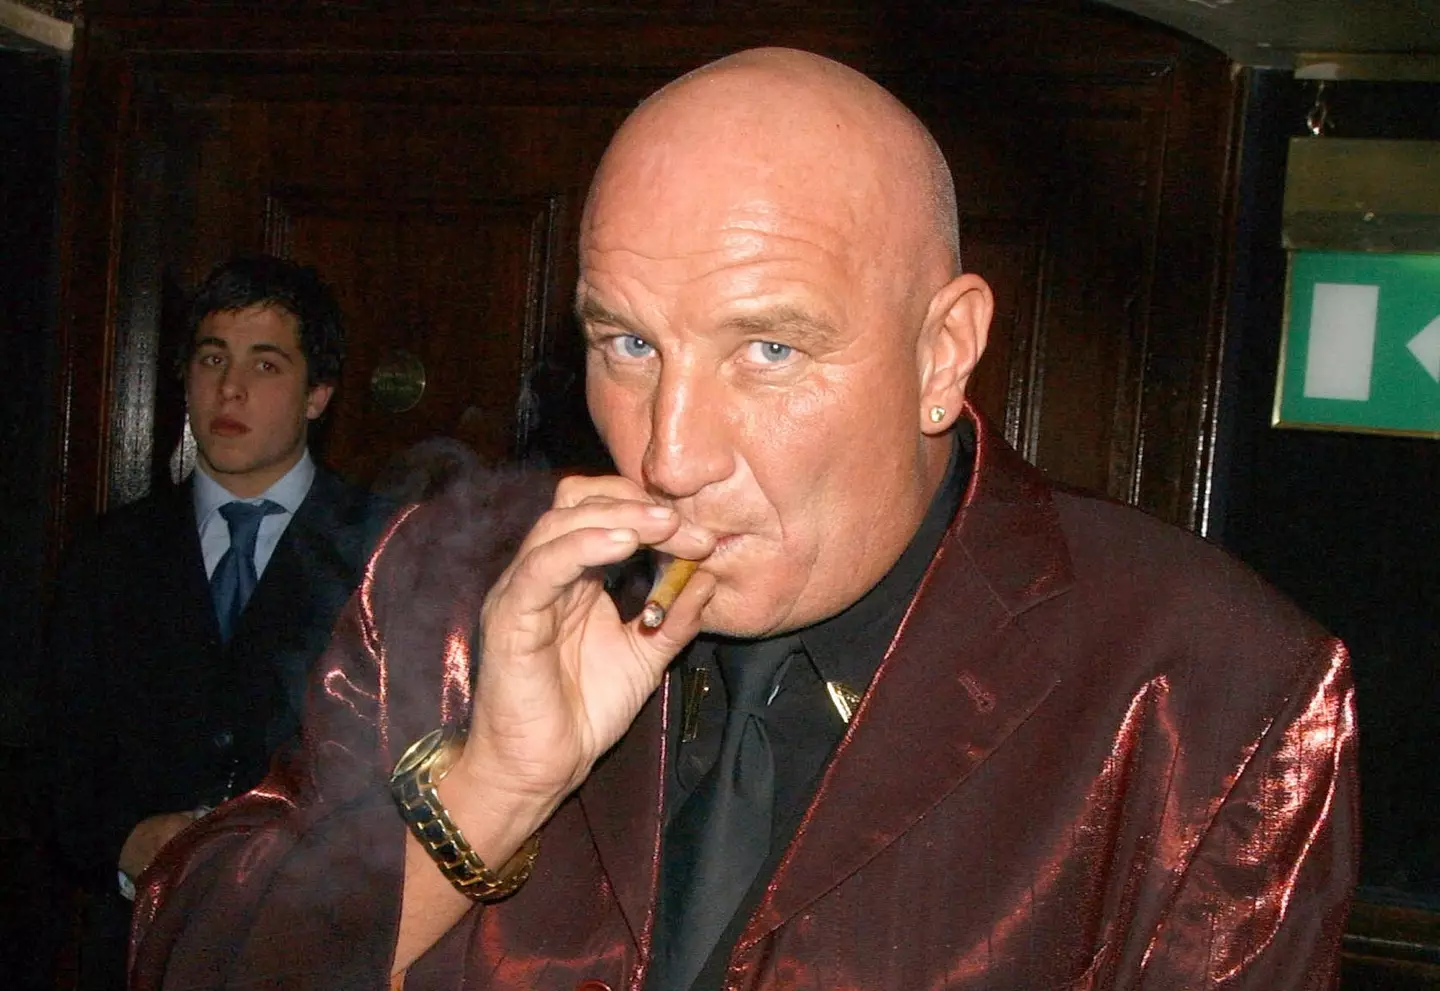 Dave Courtney called himself the 'most feared man in Britain'.